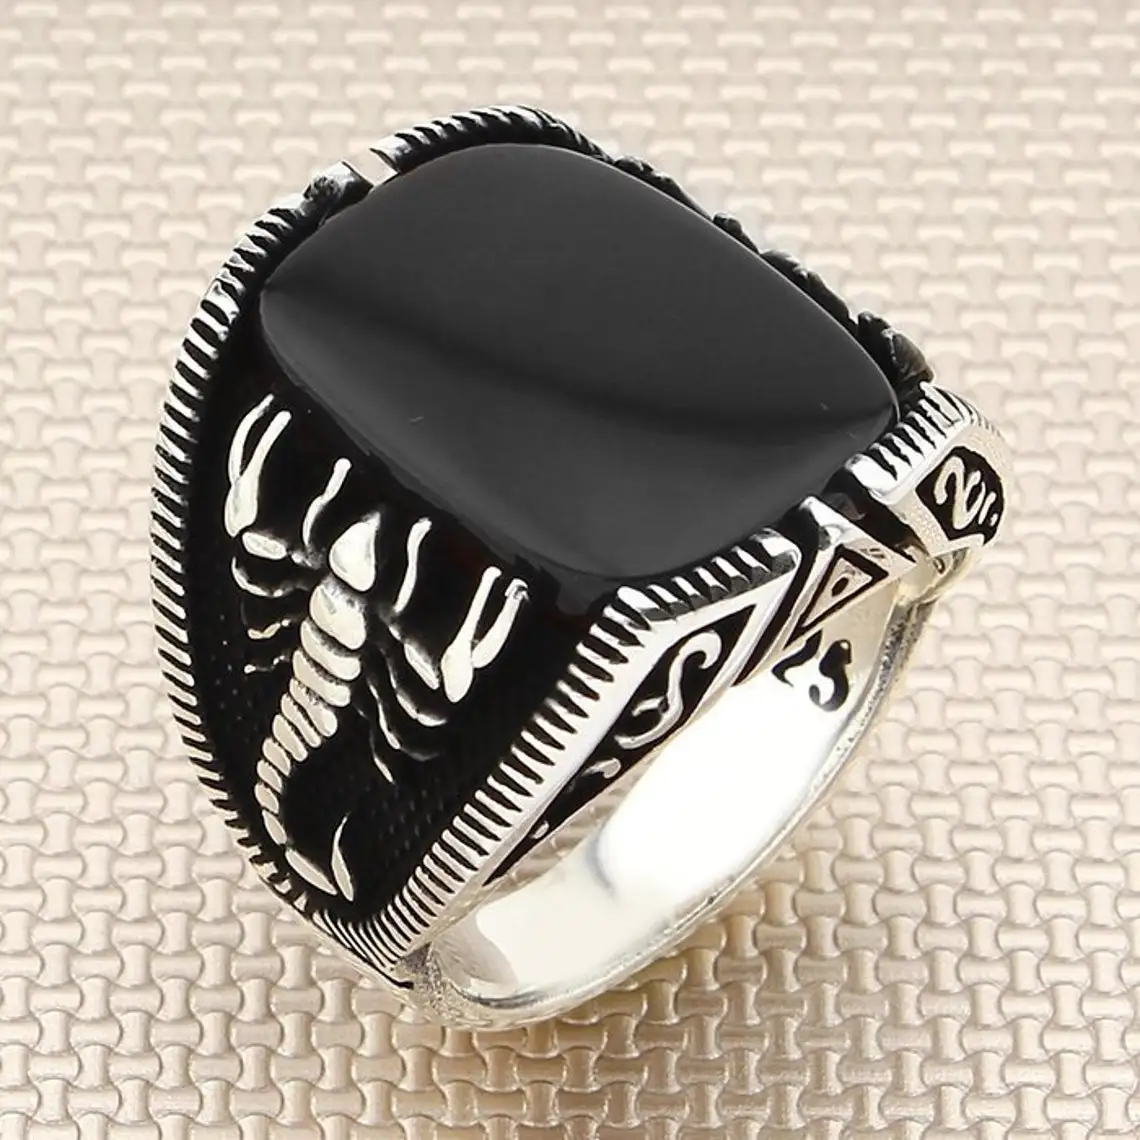 Classic Silver Ring Rectangle Black Onyx With Scorpion Ring Men Solid 925 Sterling Silver Jewelery Handmade Biker Gift Him